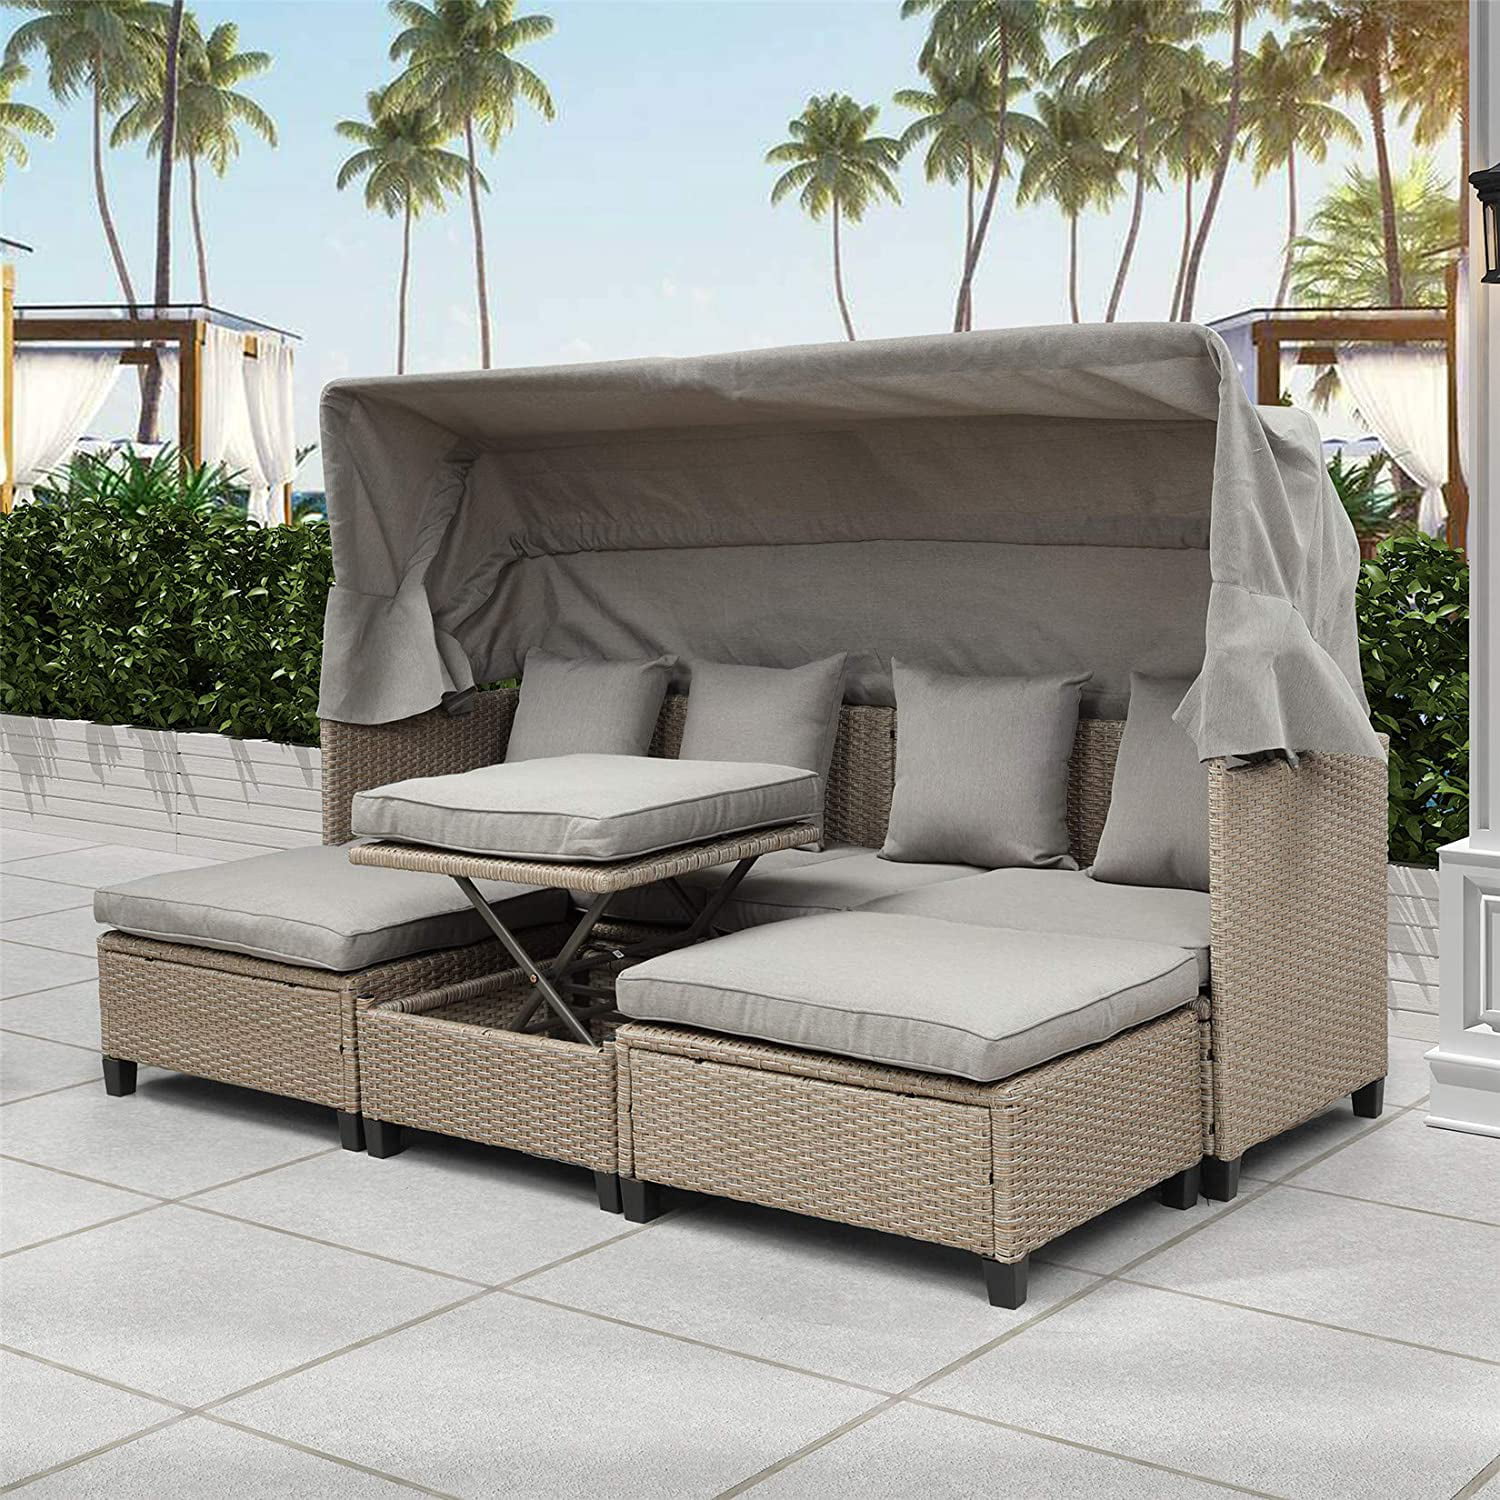 4 Piece Outdoor Sectional Sofa Set Patio Rattan Daybed